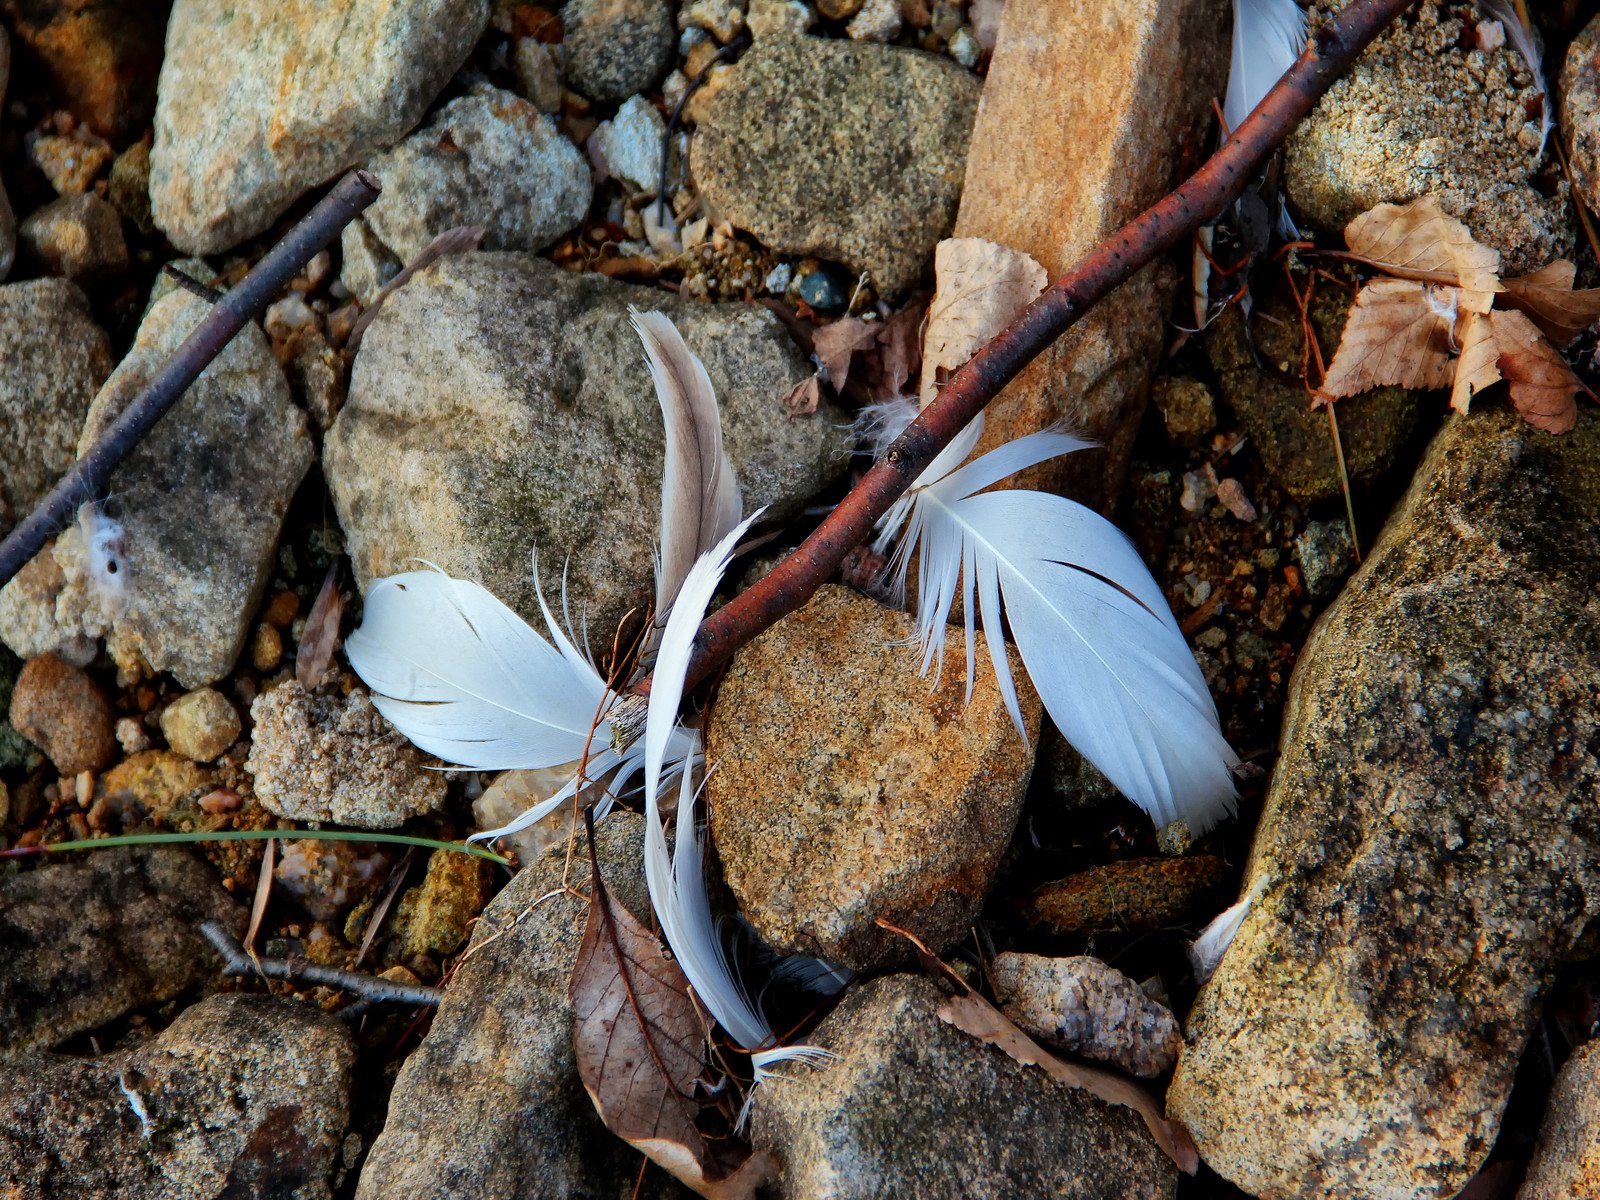 The departing Snow Geese left there gifts along the reservoirs shoreline.